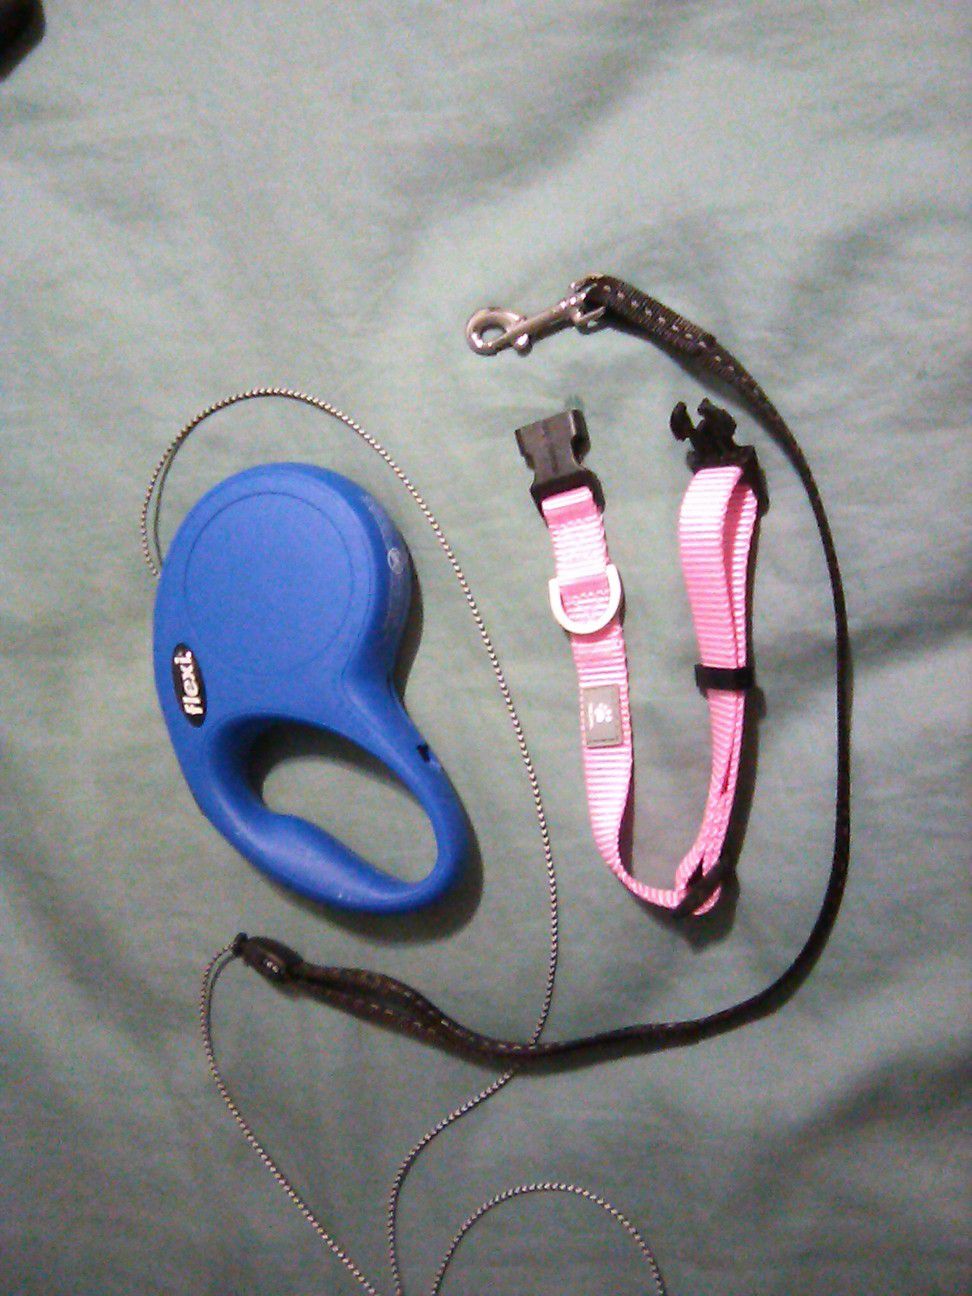 Flexi retractable pet small dog leash and collar pink blue new